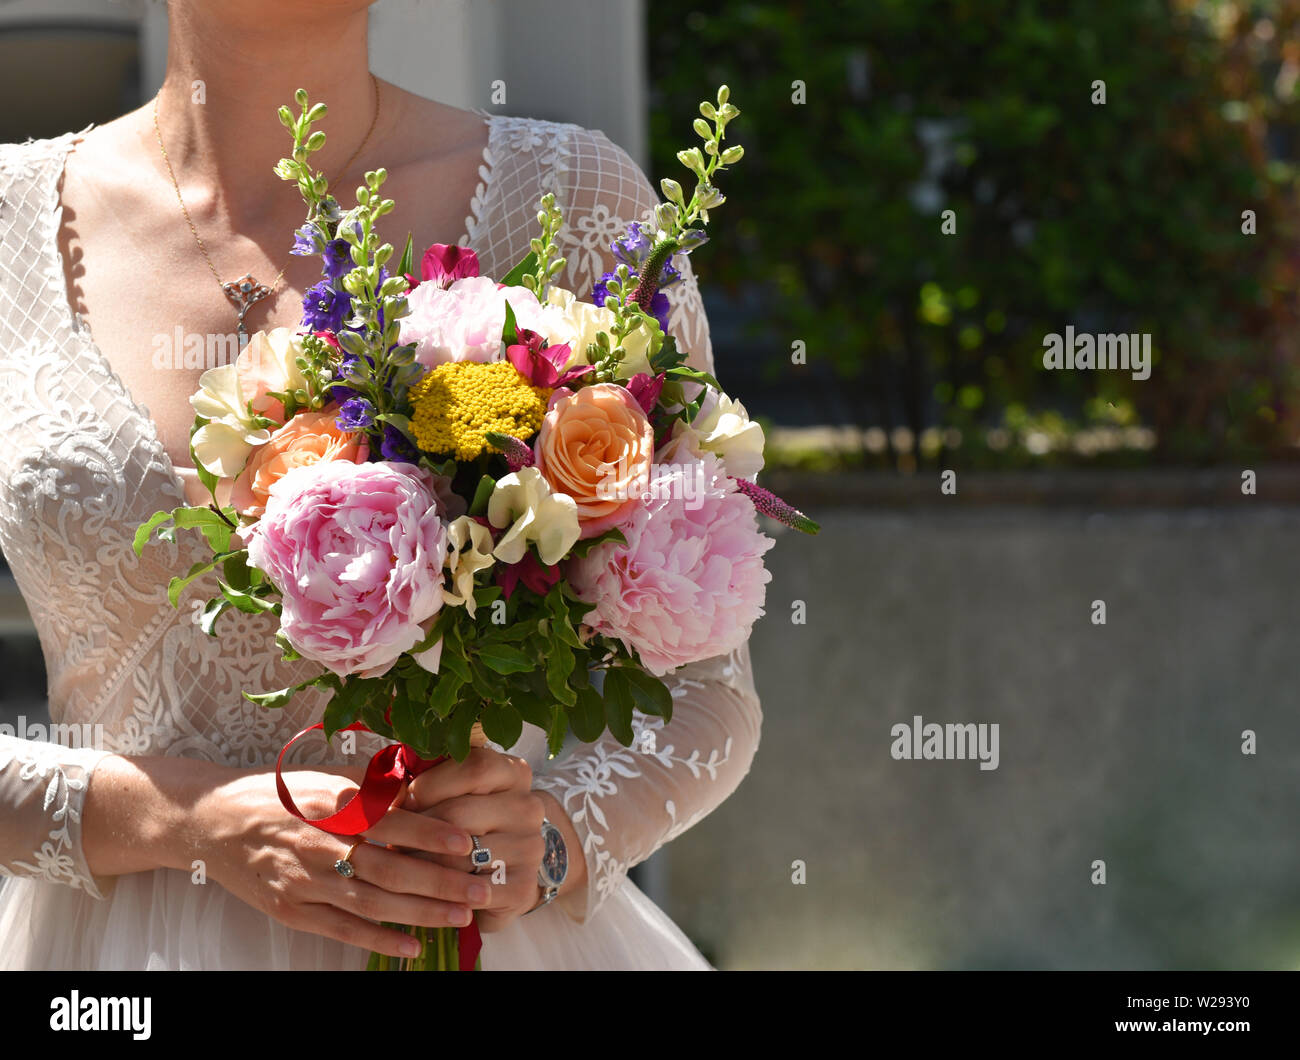 A traditional white wedding bride holding her bouquet on her wedding day Stock Photo